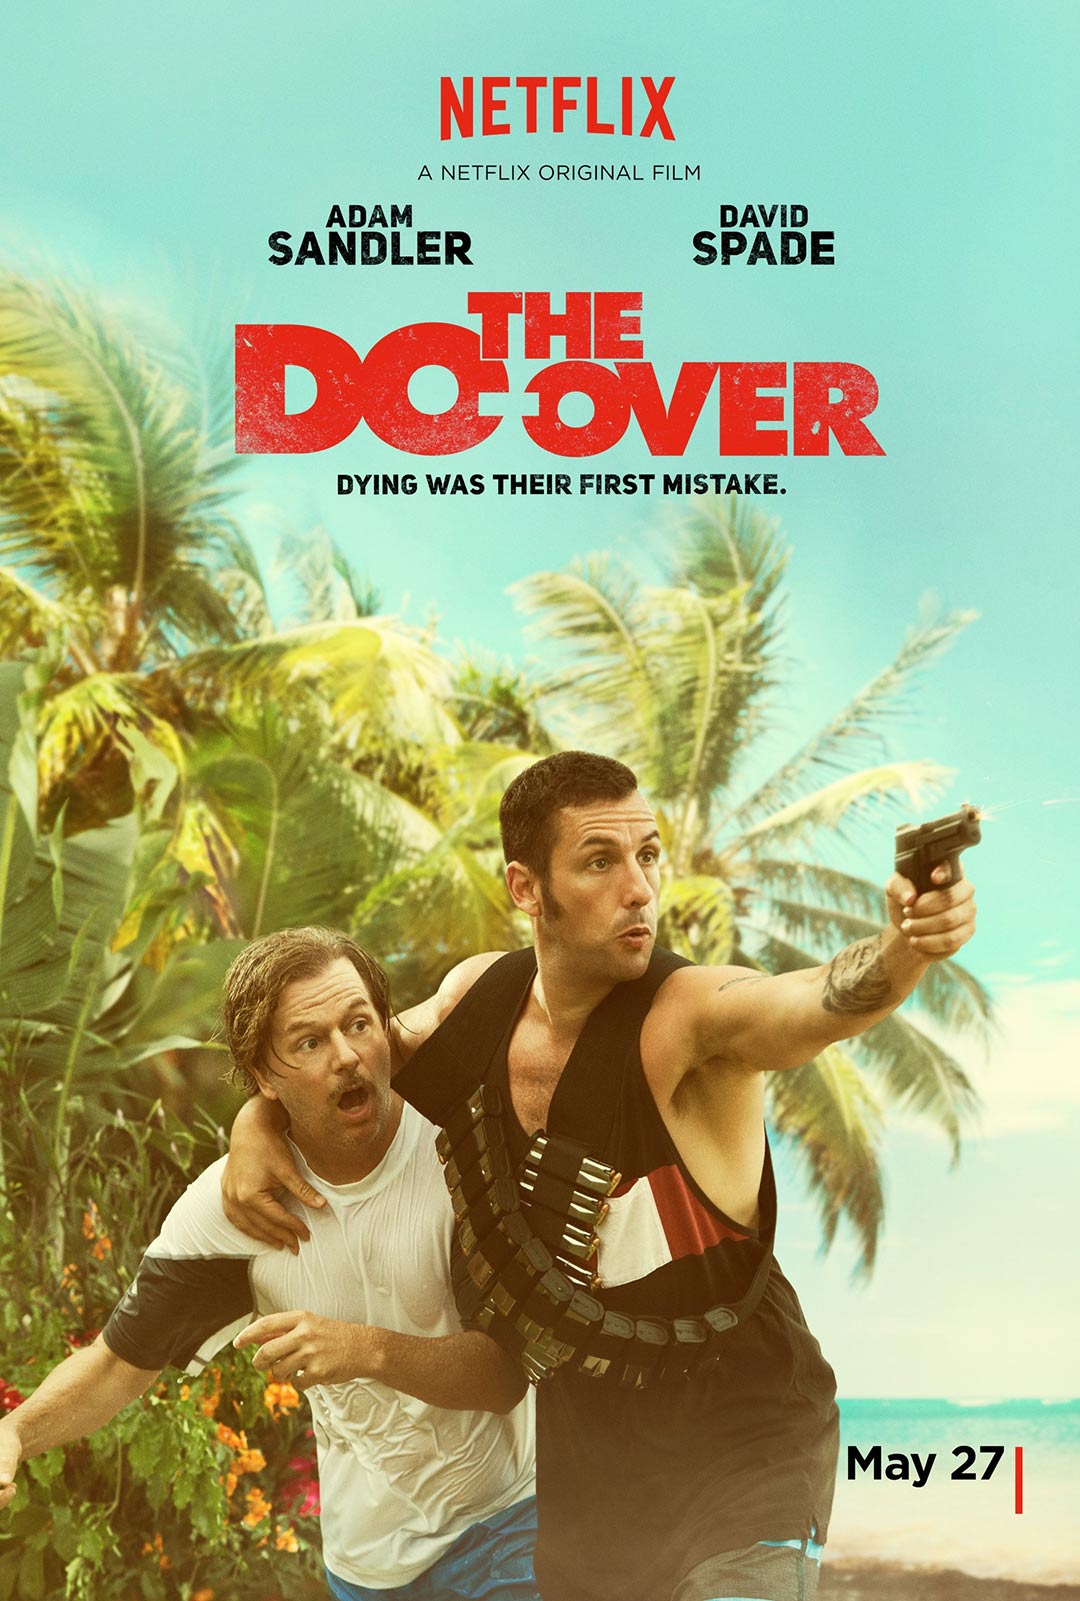 The Do-Over (2016)